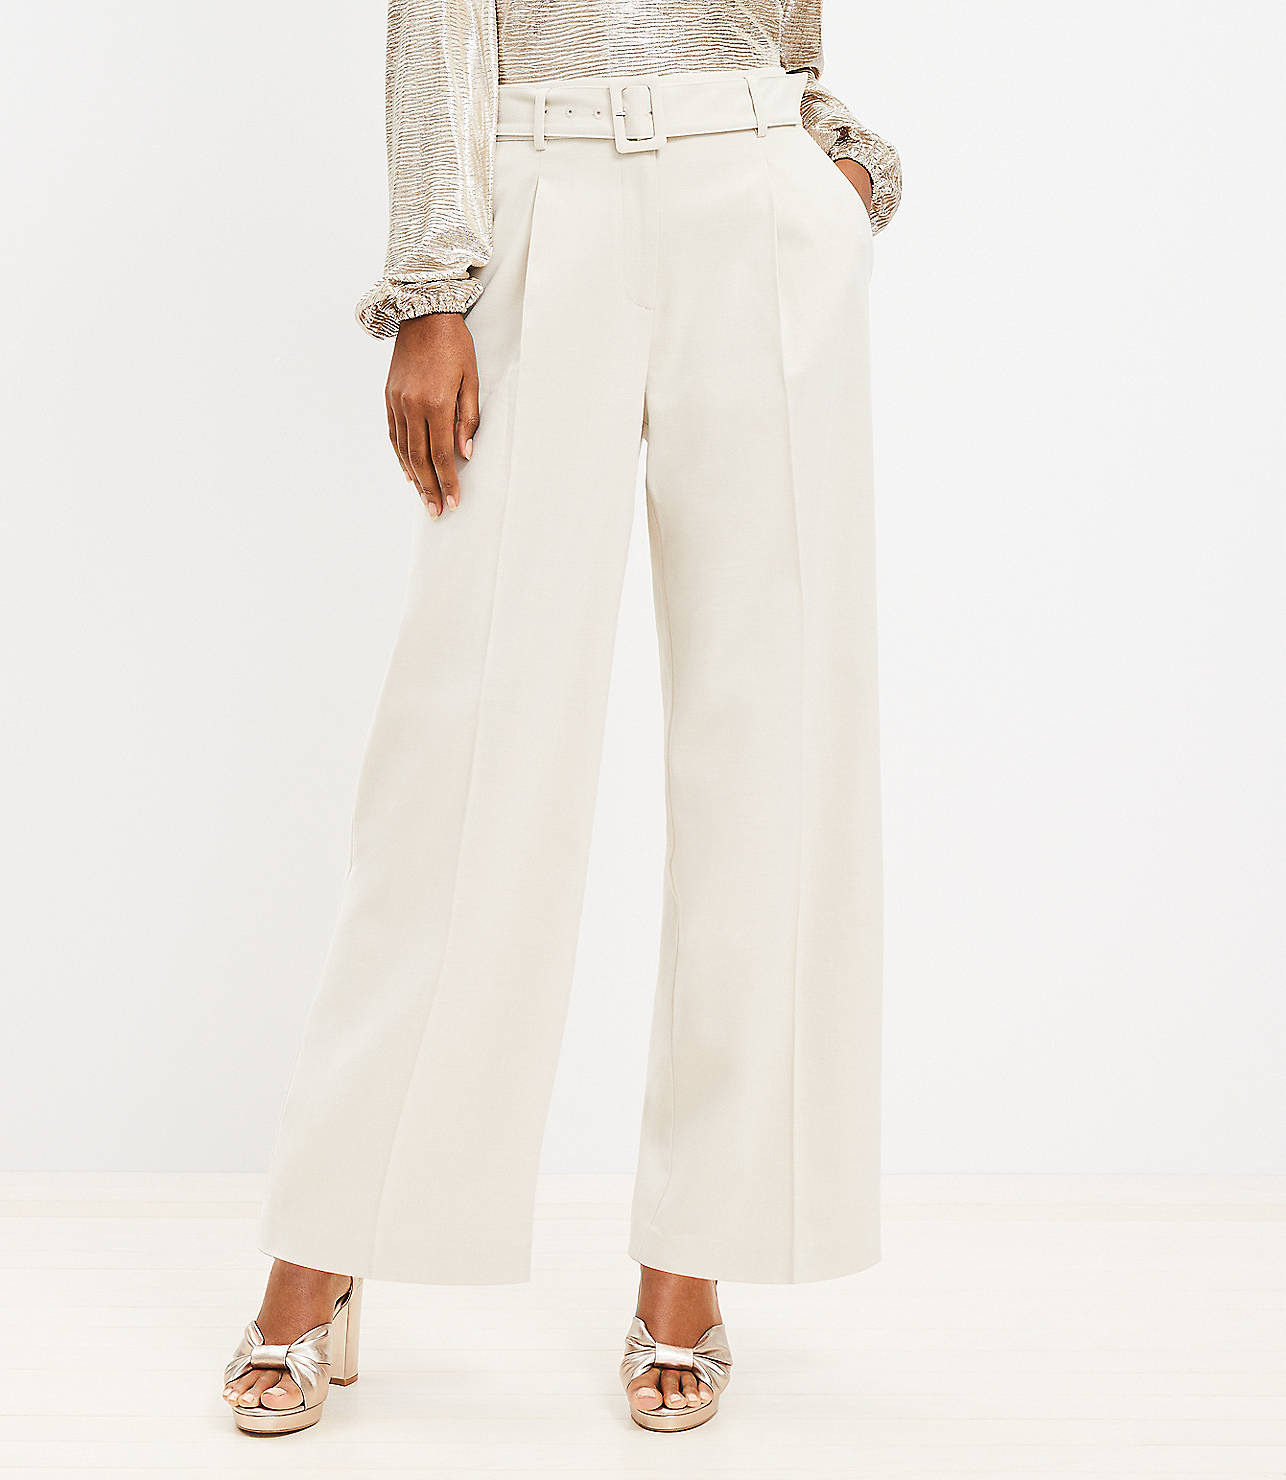 Petite Belted Wide Leg Pants in Heathered Brushed Flannel